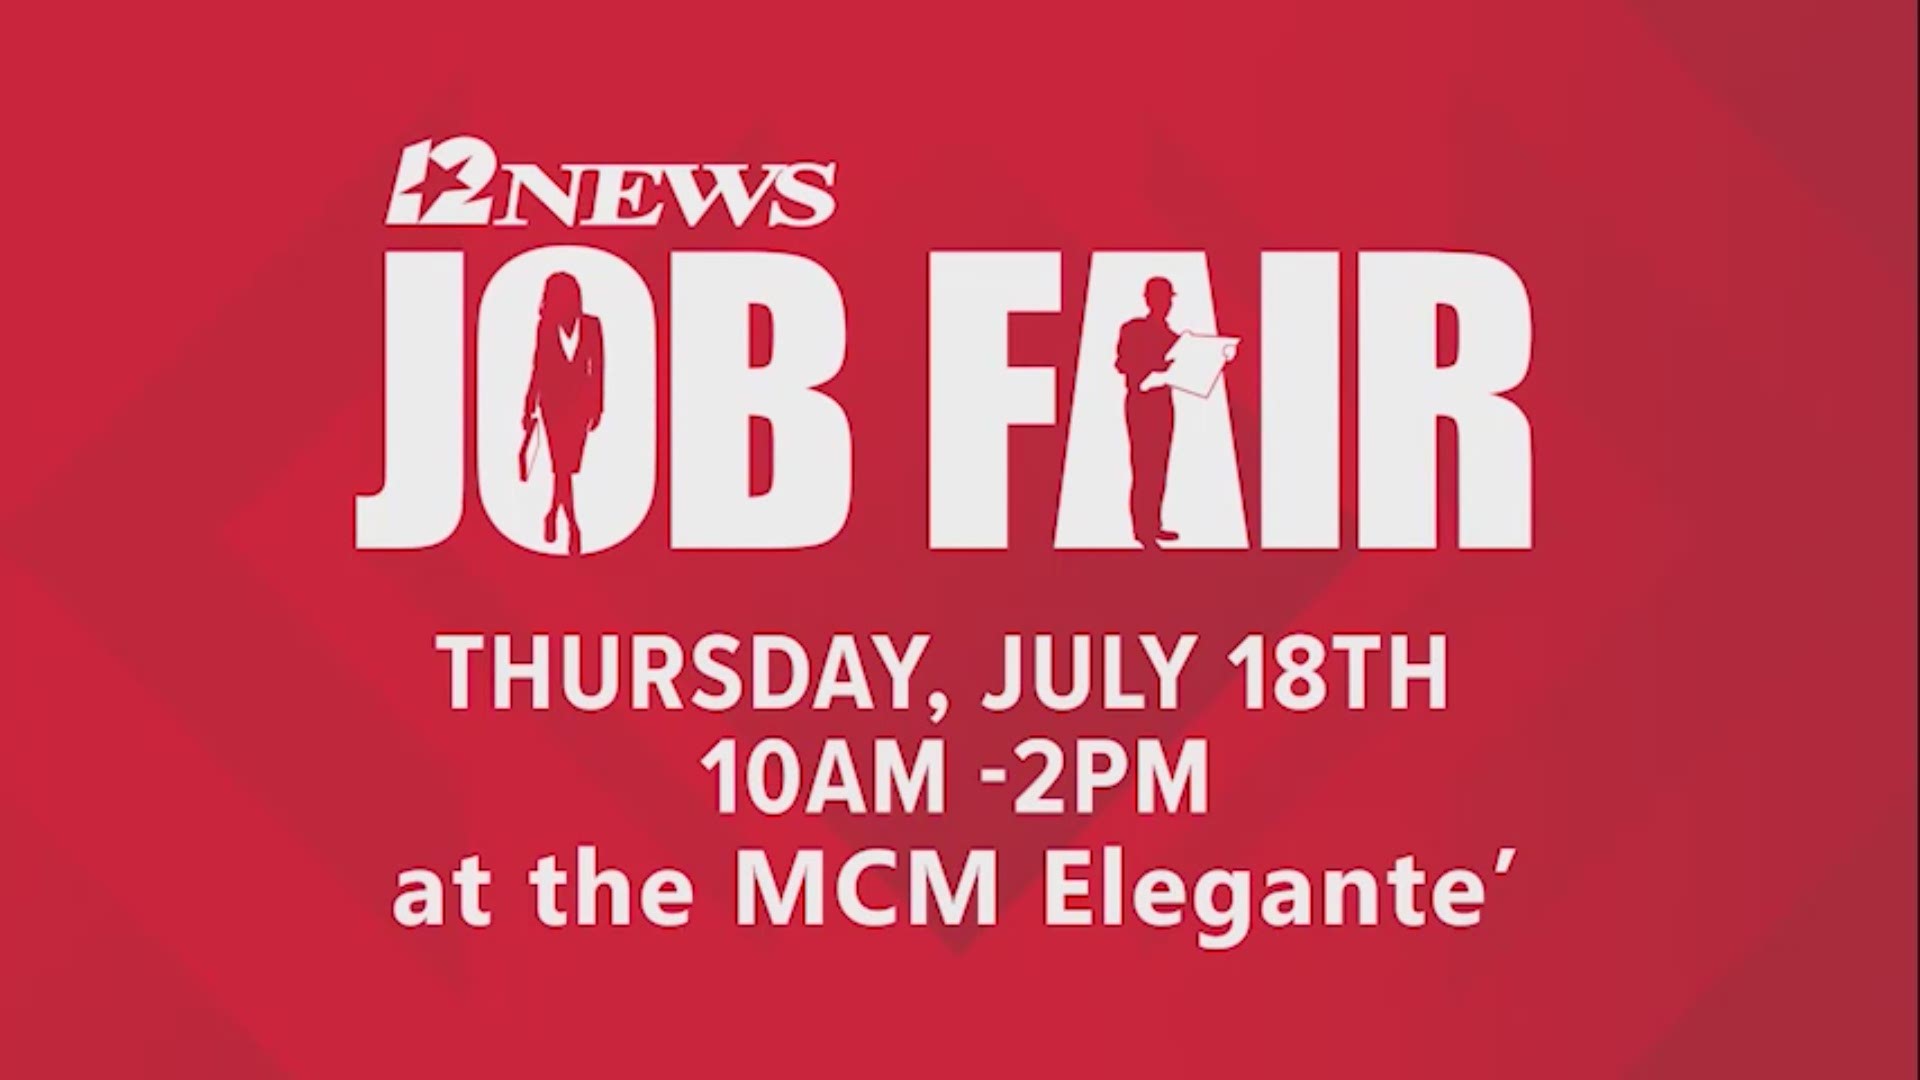 Don't miss the 2019 12News Job Fair in July